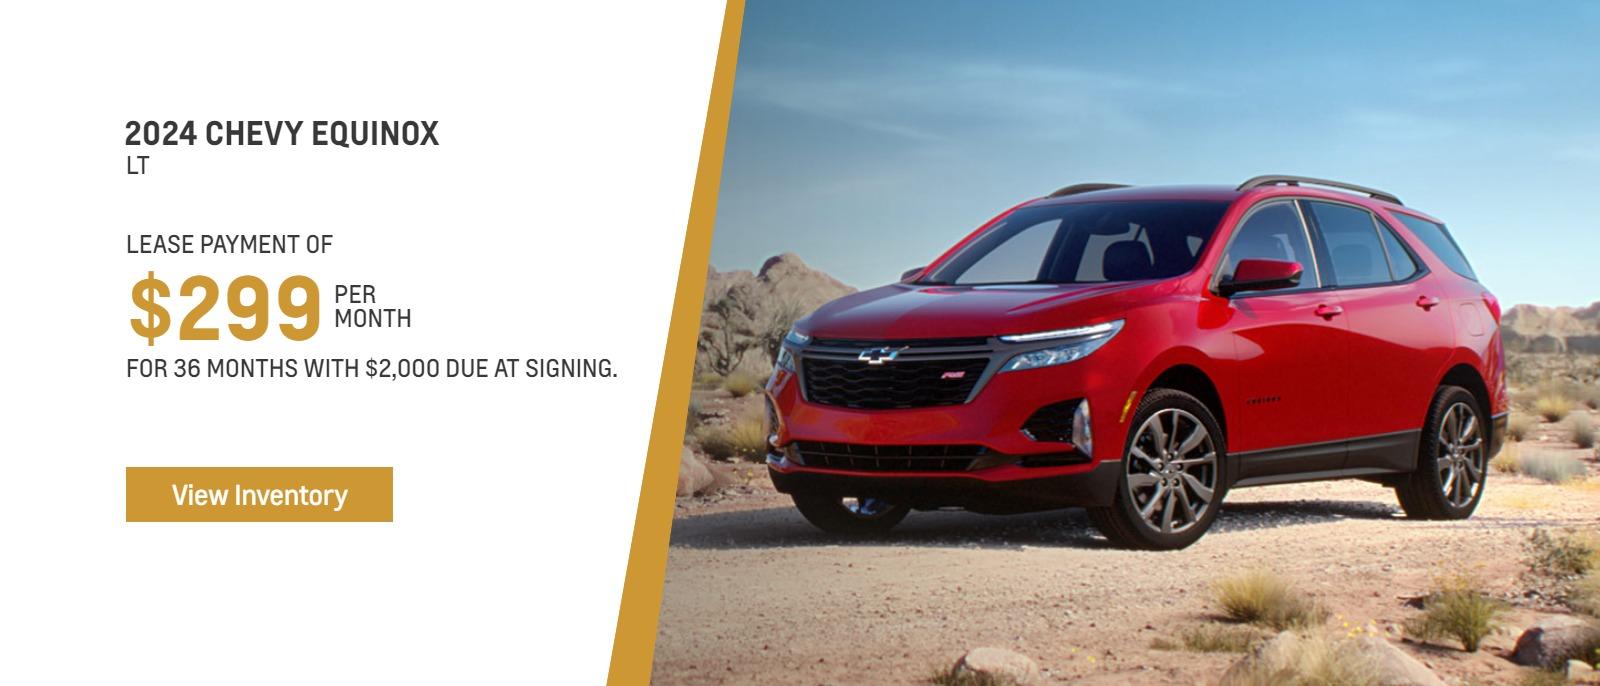 2024 Chevy Equinox LT. 
Lease payment of $299 for 36 months with
$2000 due at signing.